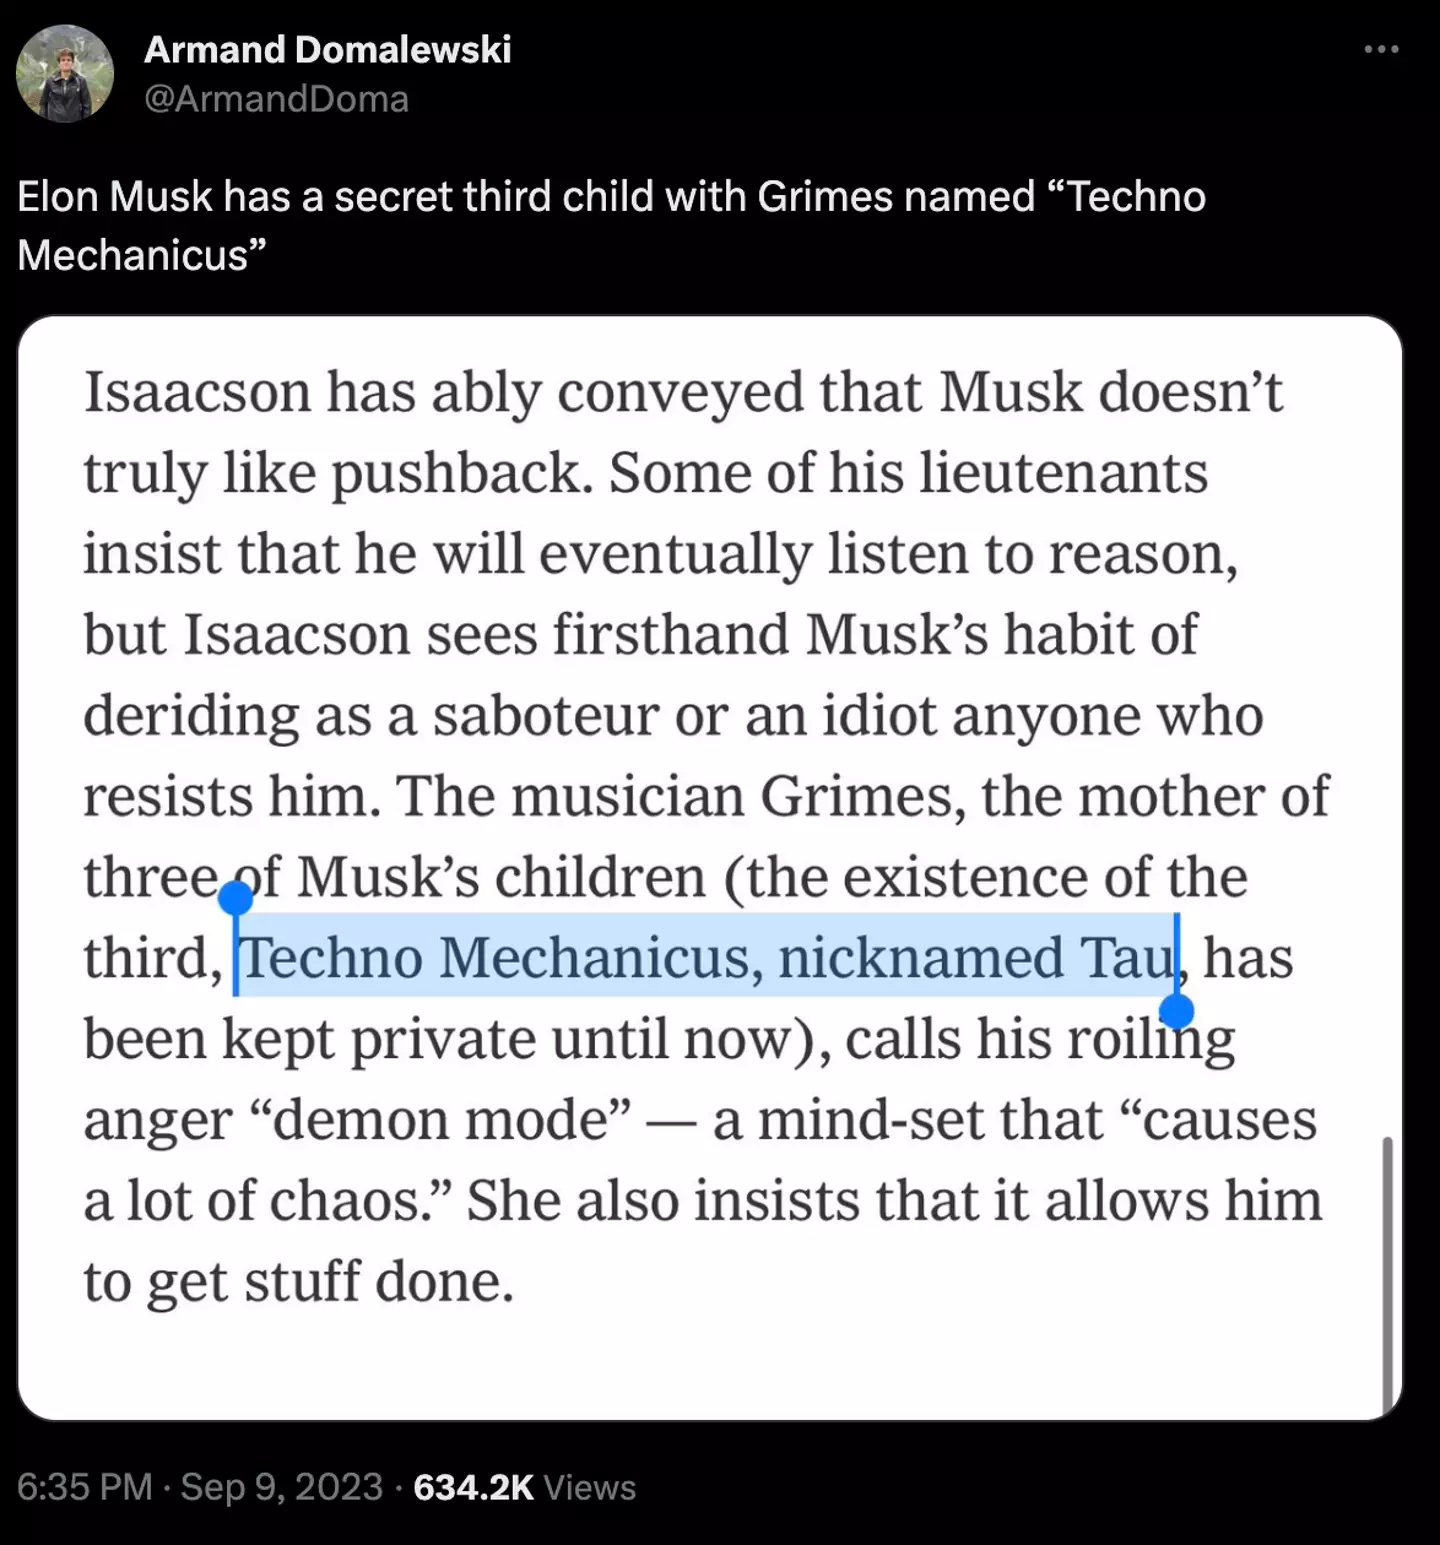 Elon Musk and Grimes' third child is called Techno Mechanicus.